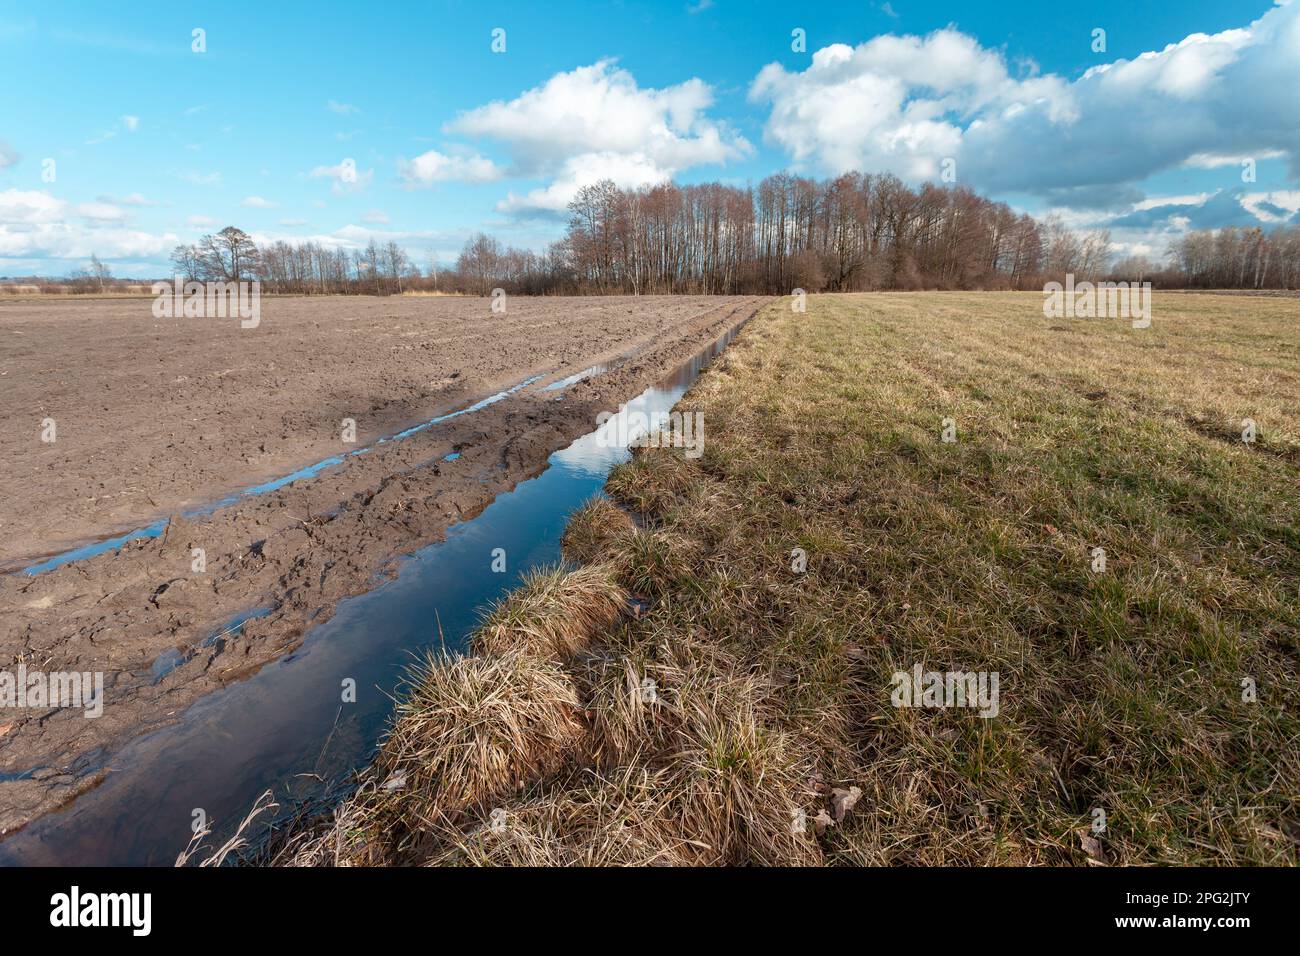 Water in a plowed field next to a meadow and clouds on the blue sky Stock Photo